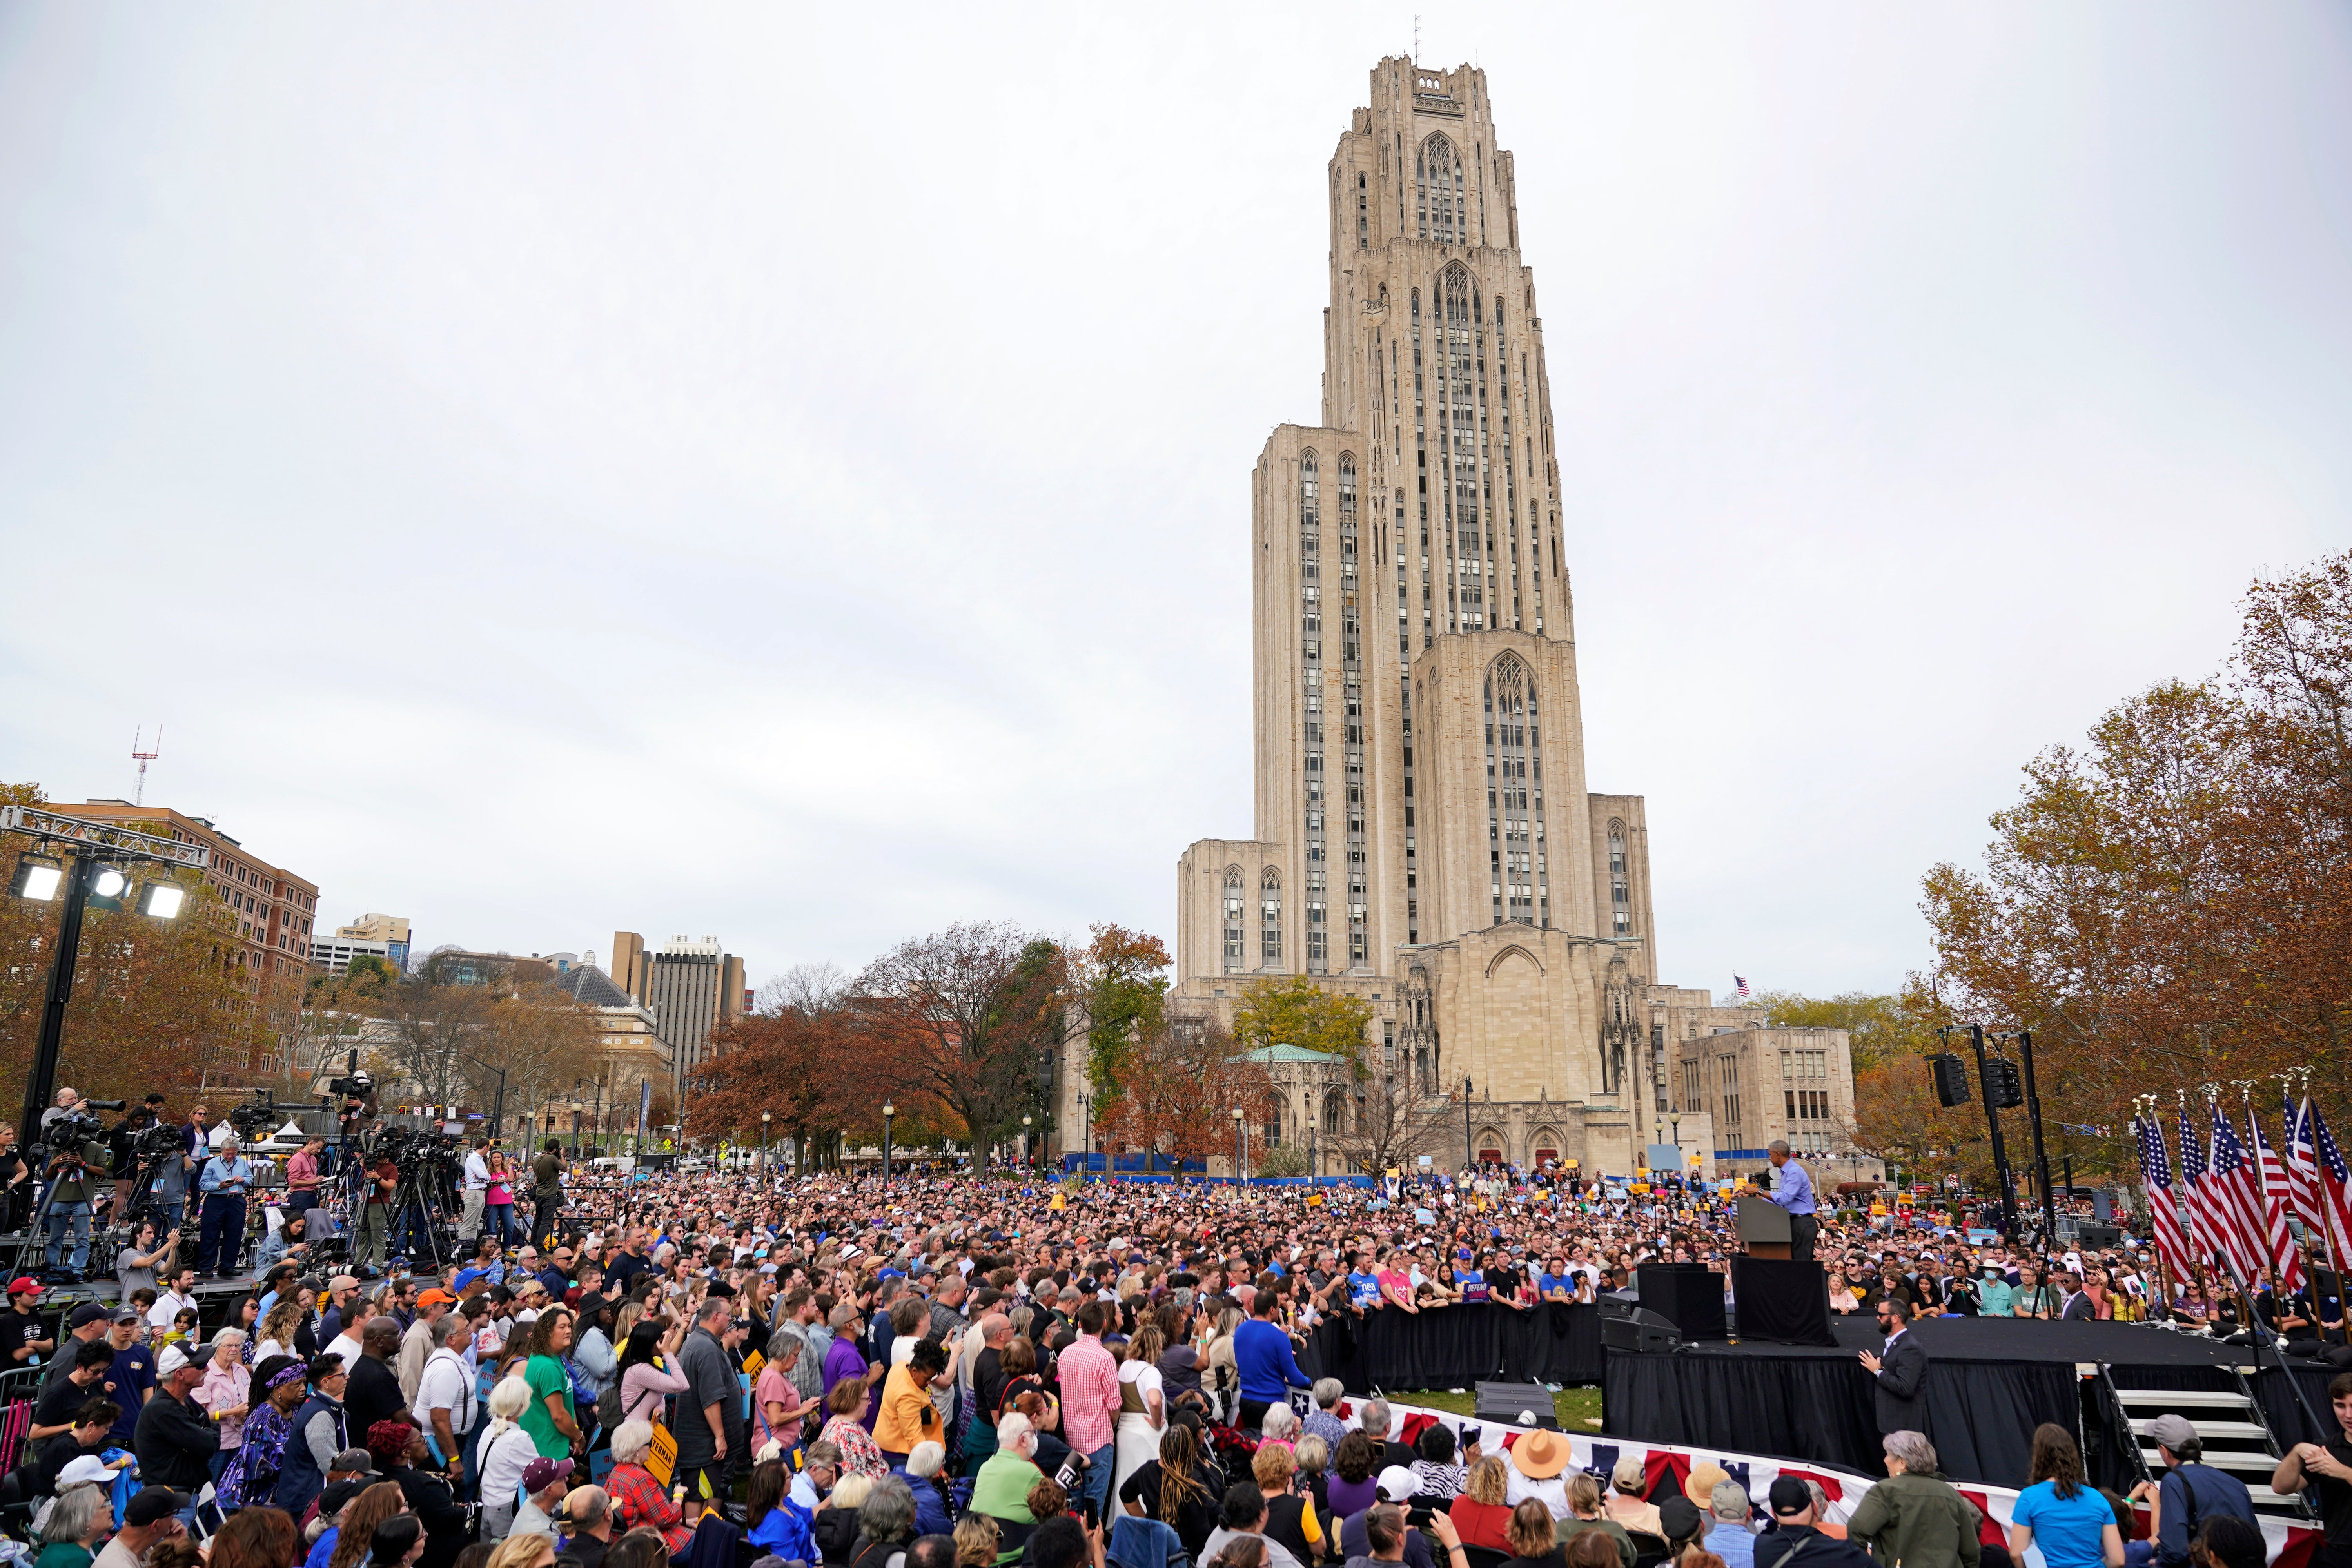 The University of Pittsburgh students have been criminally charged with abuse of a corpse